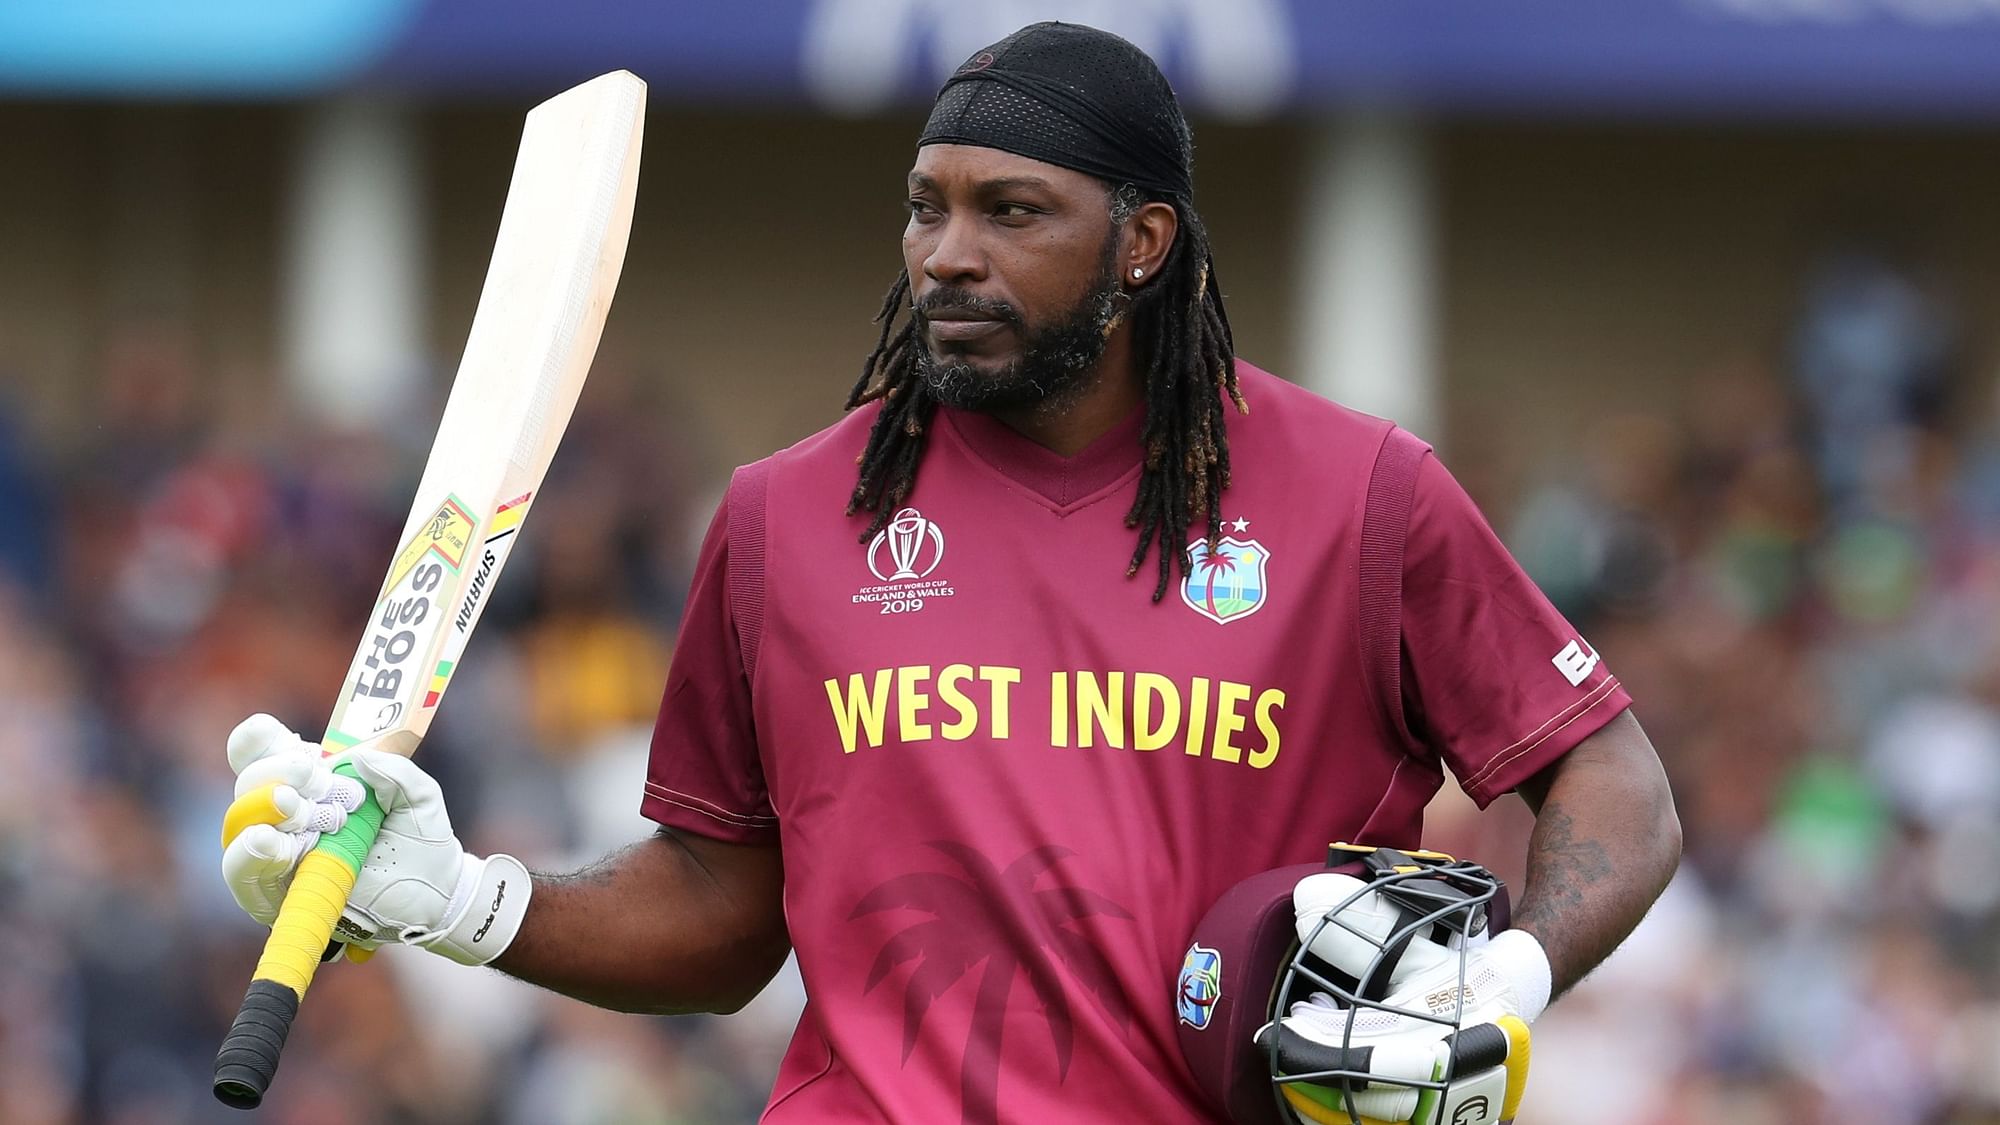 West Indies’ Chris Gayle leaves the field after his dismissal for 50 runs during a Cricket World Cup match against Pakistan at Trent Bridge cricket ground in Nottingham, England, Friday, May 31, 2019.